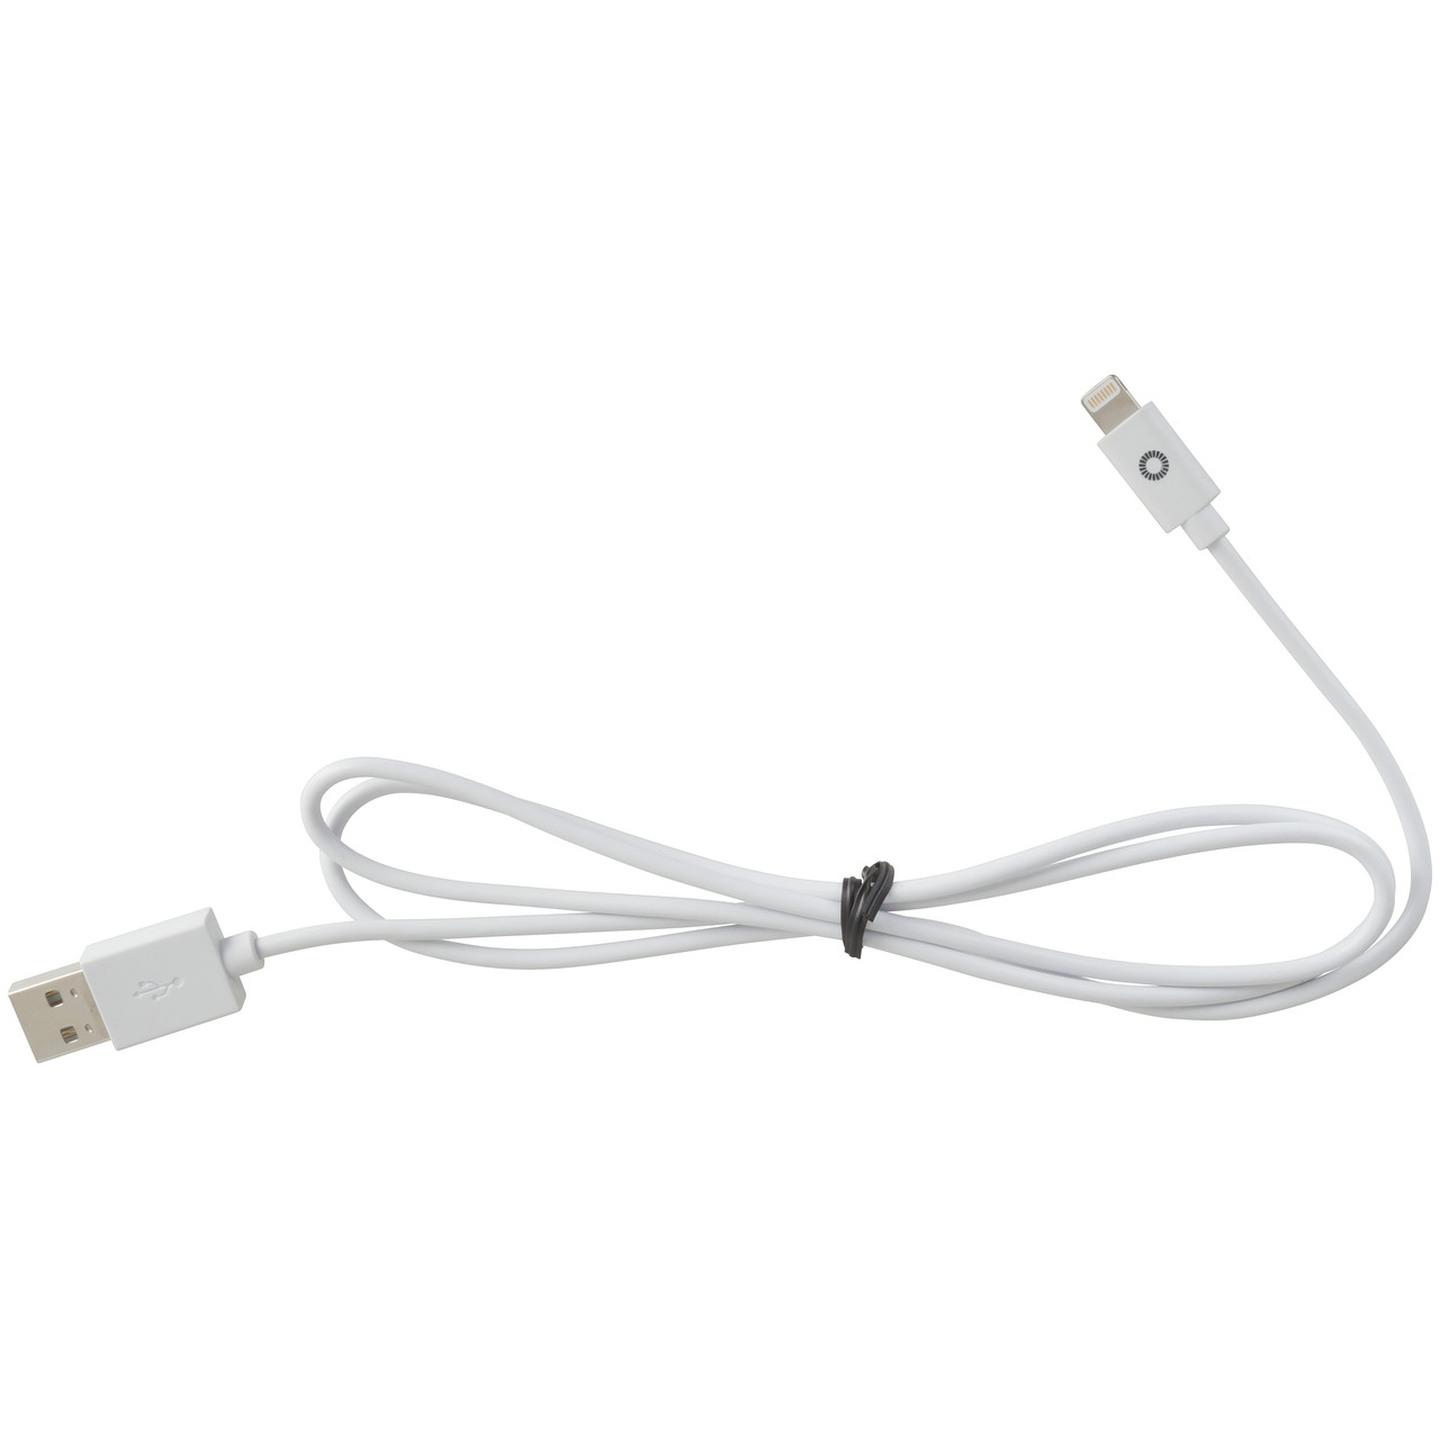 Power Boost Cable Made for iPhone iPad or iPod